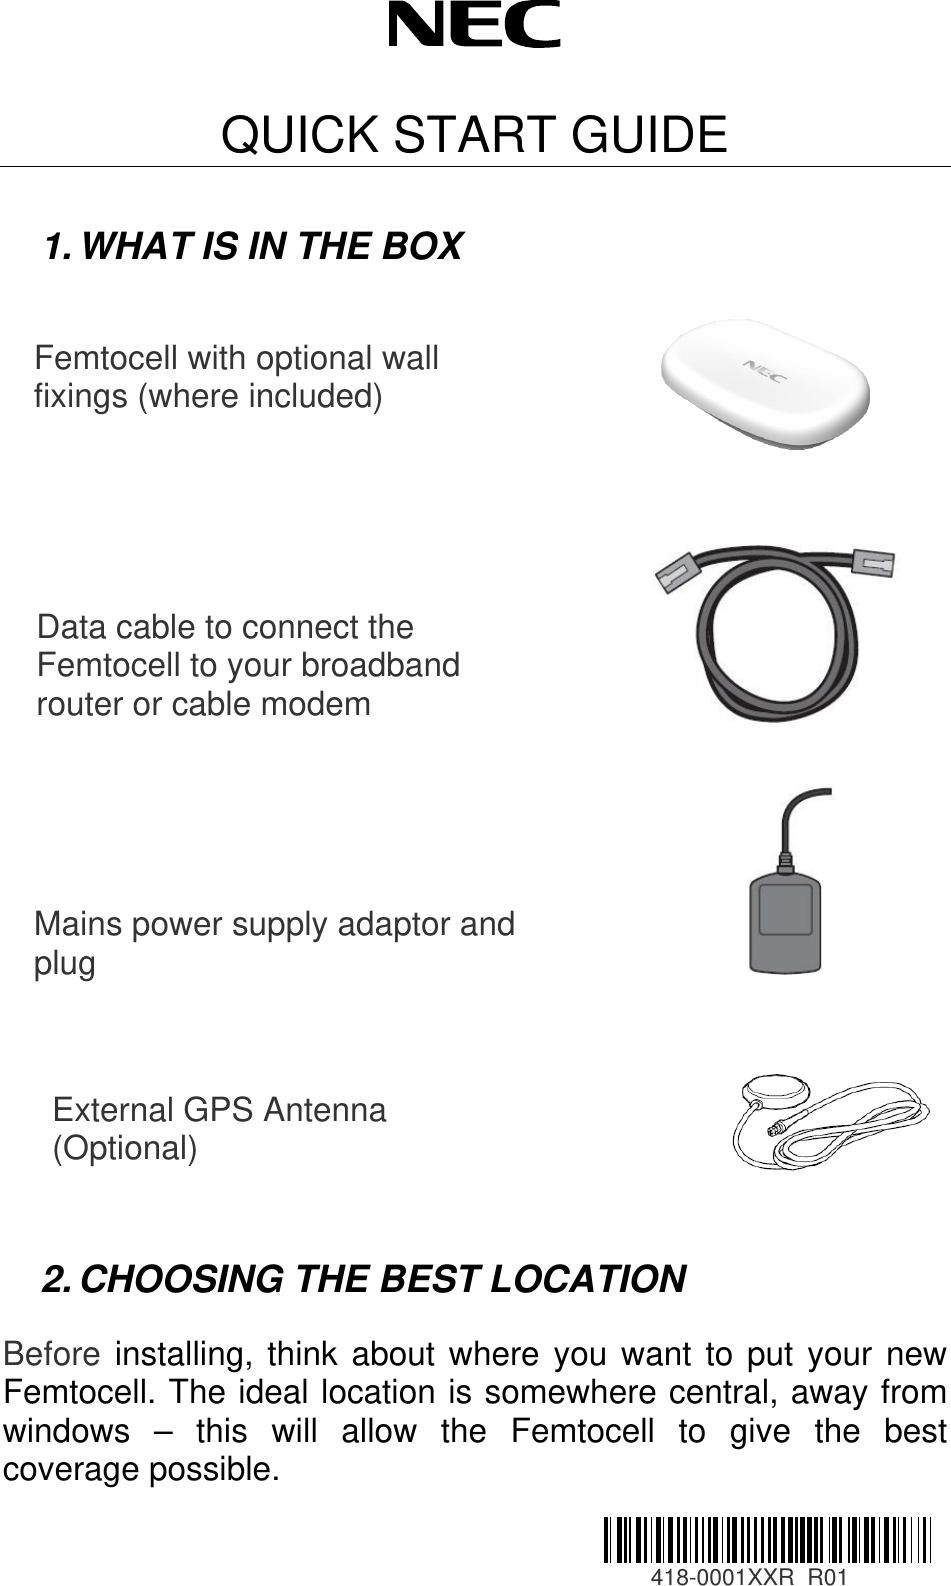   QUICK START GUIDE  1. WHAT IS IN THE BOX          2. CHOOSING THE BEST LOCATION                Femtocell with optional wall fixings (where included) Data cable to connect the Femtocell to your broadband router or cable modem Mains power supply adaptor and plug External GPS Antenna (Optional)  Before installing, think about where you want to put your new Femtocell. The ideal location is somewhere central, away from windows – this will allow the Femtocell to give the best coverage possible.                                                                         418-0001XXR  R01 